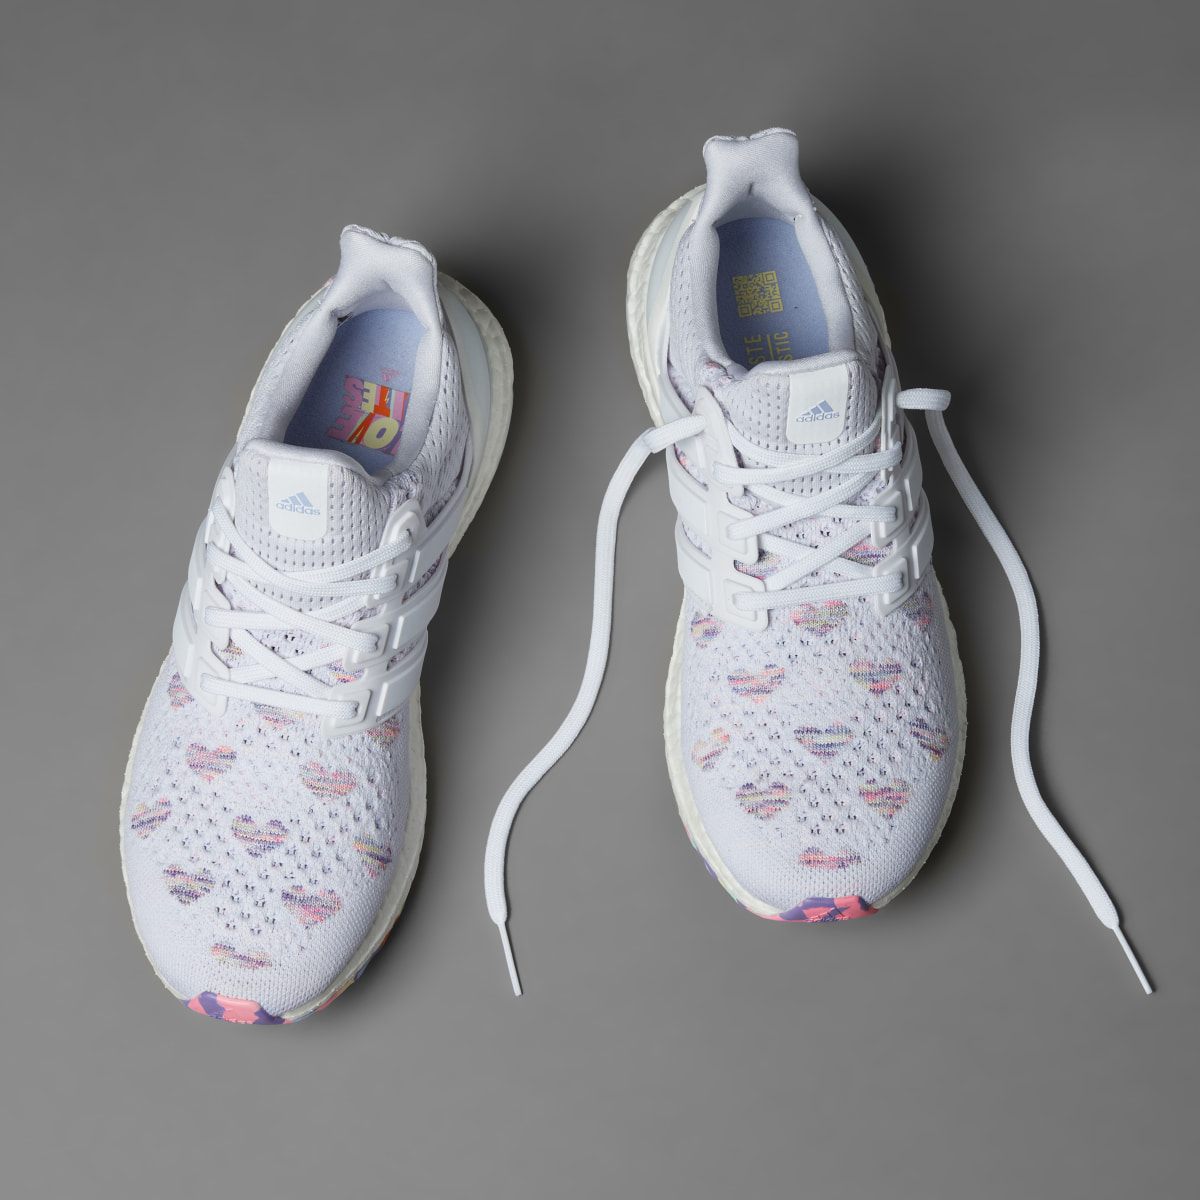 Adidas Valentine's Day Ultraboost 1.0 Shoes. 5